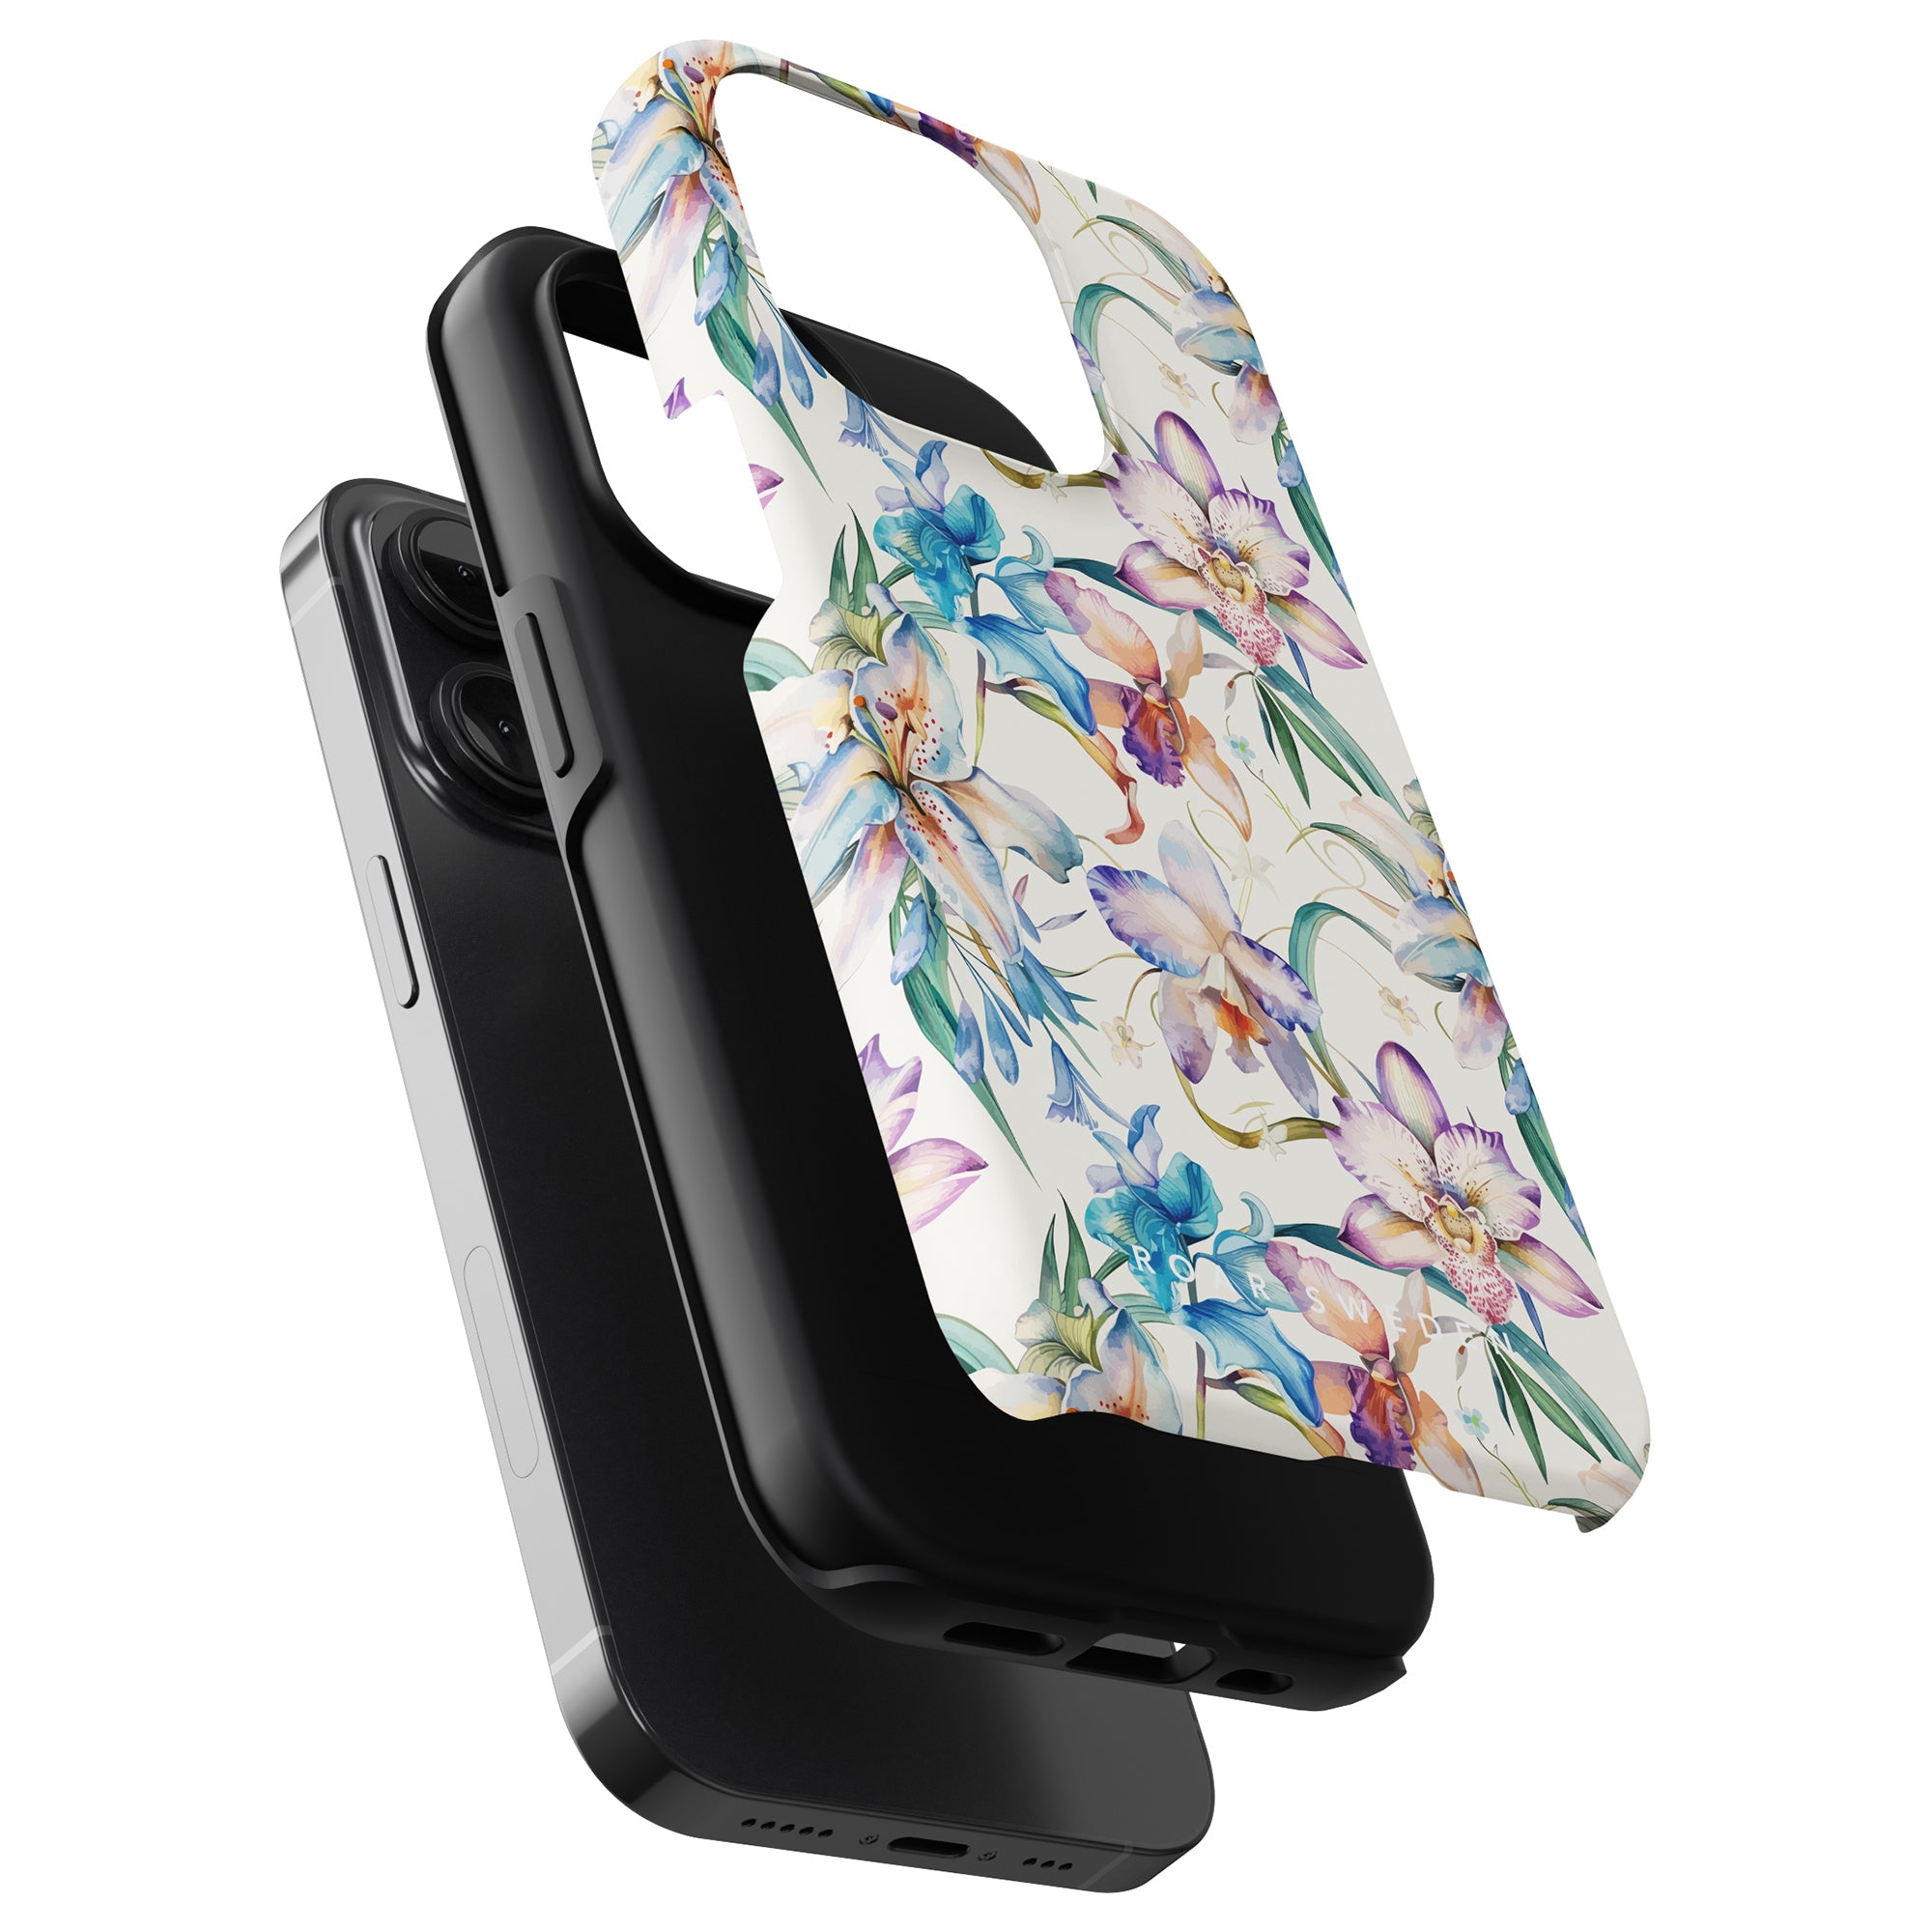 Three smartphone cases are shown: a plain black one, a transparent one, and a colorful floral patterned one from our "Summer Collection." The vibrant Bouquet - Tough Case is lifted above the two plain cases.